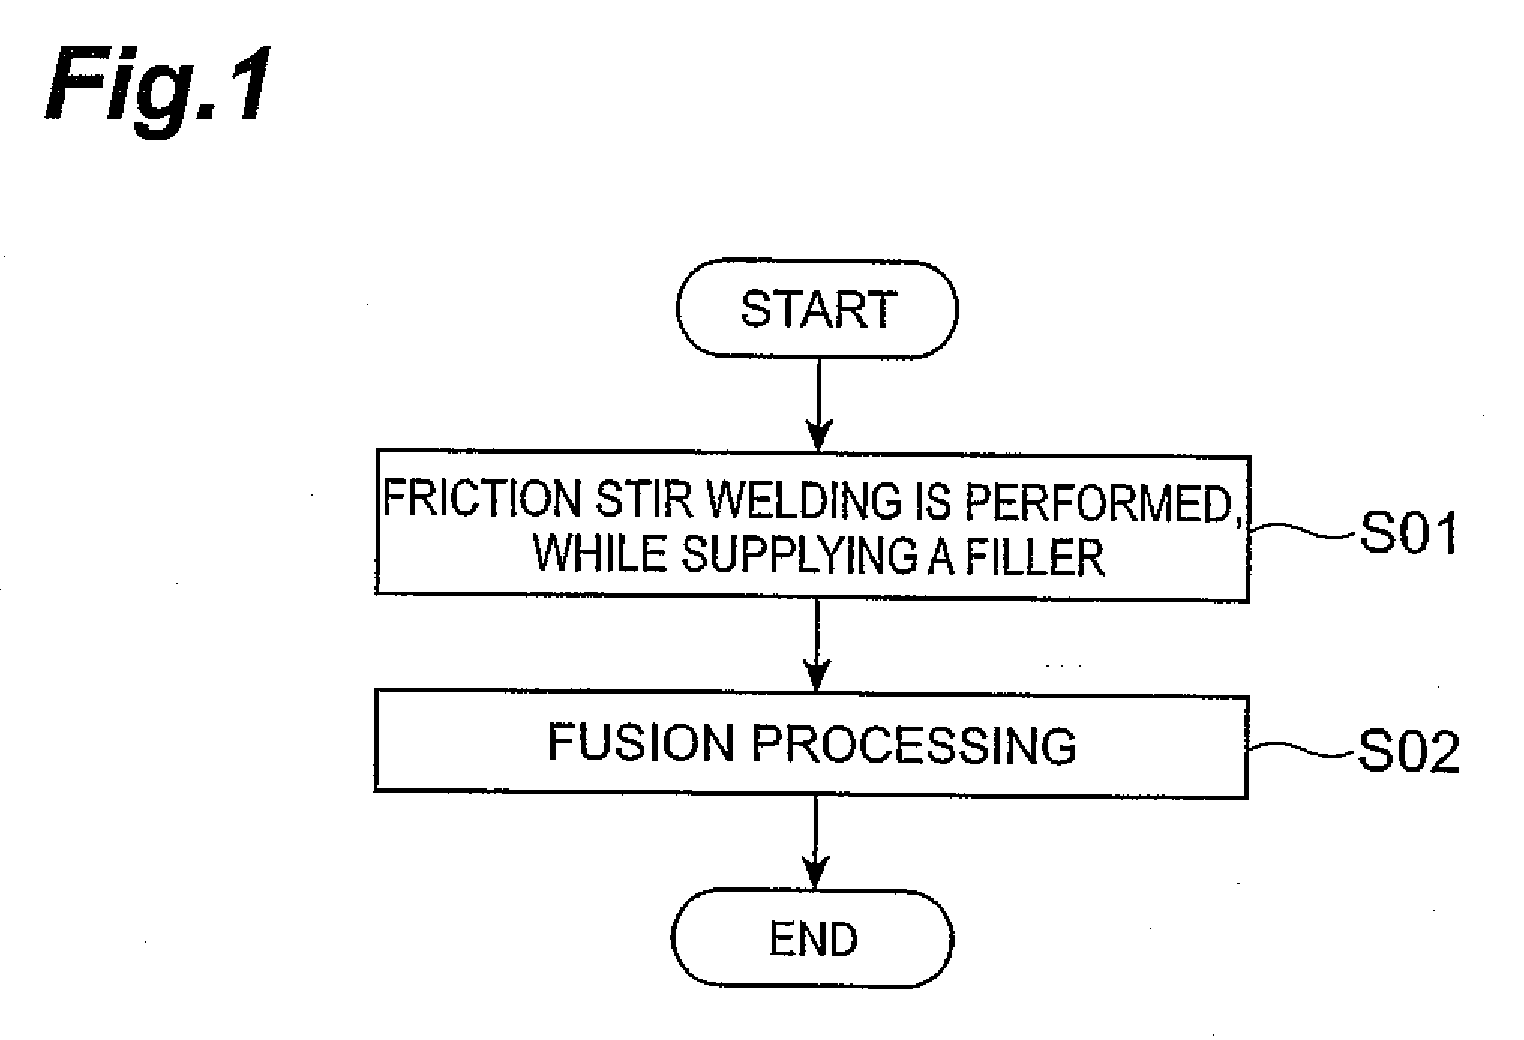 Process for working metal material and structures